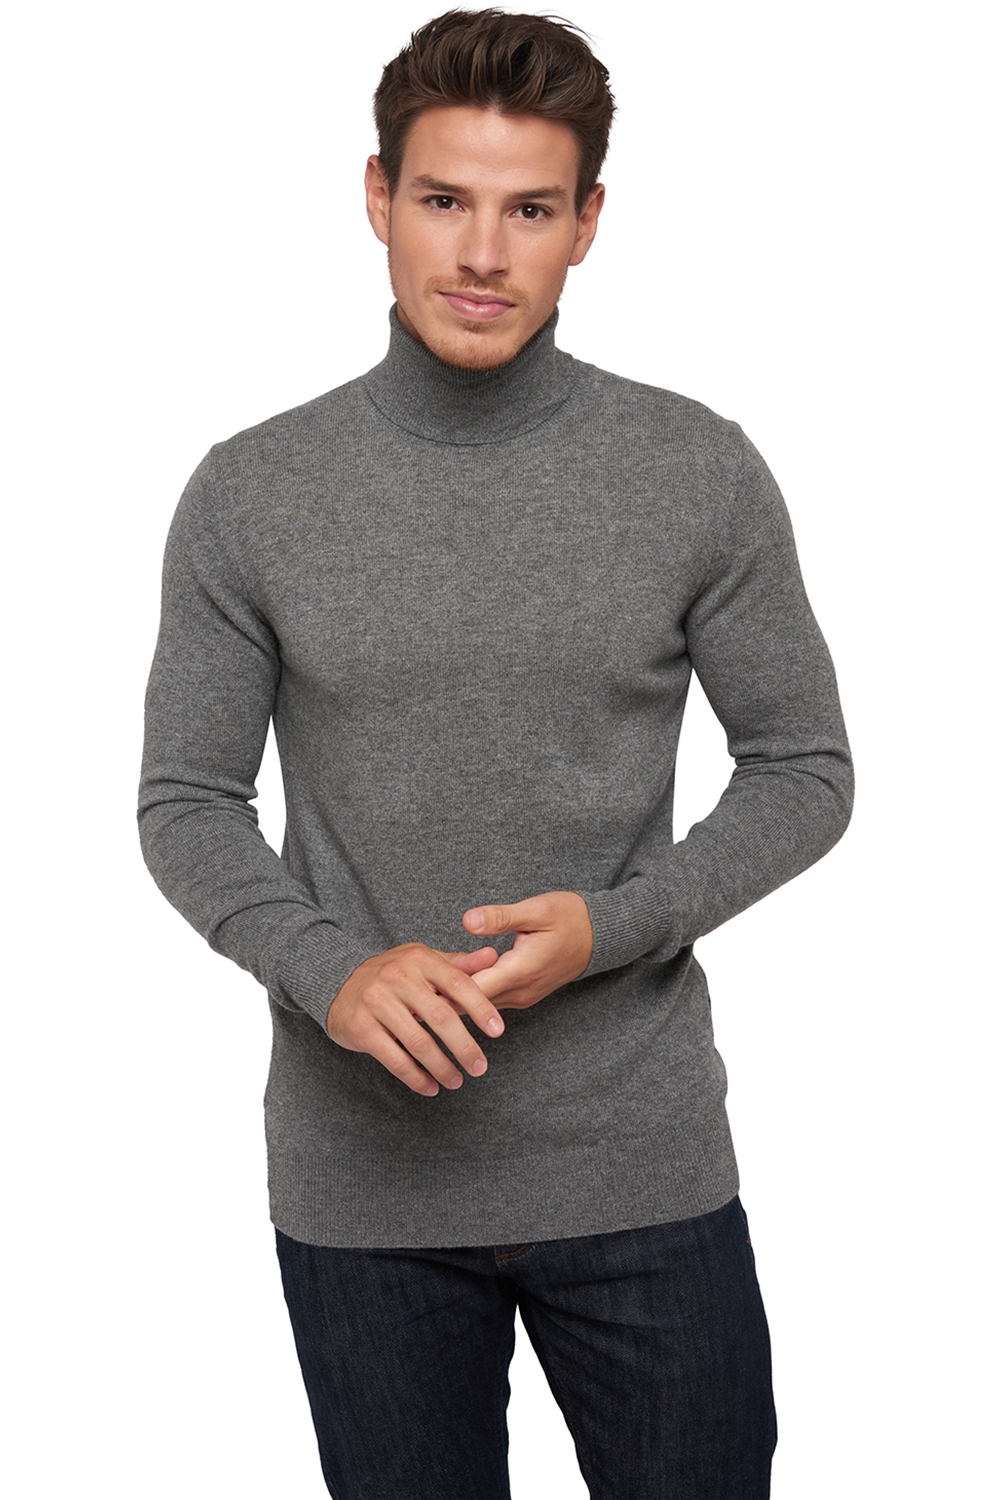 Cashmere men low prices tarry first grey marl l